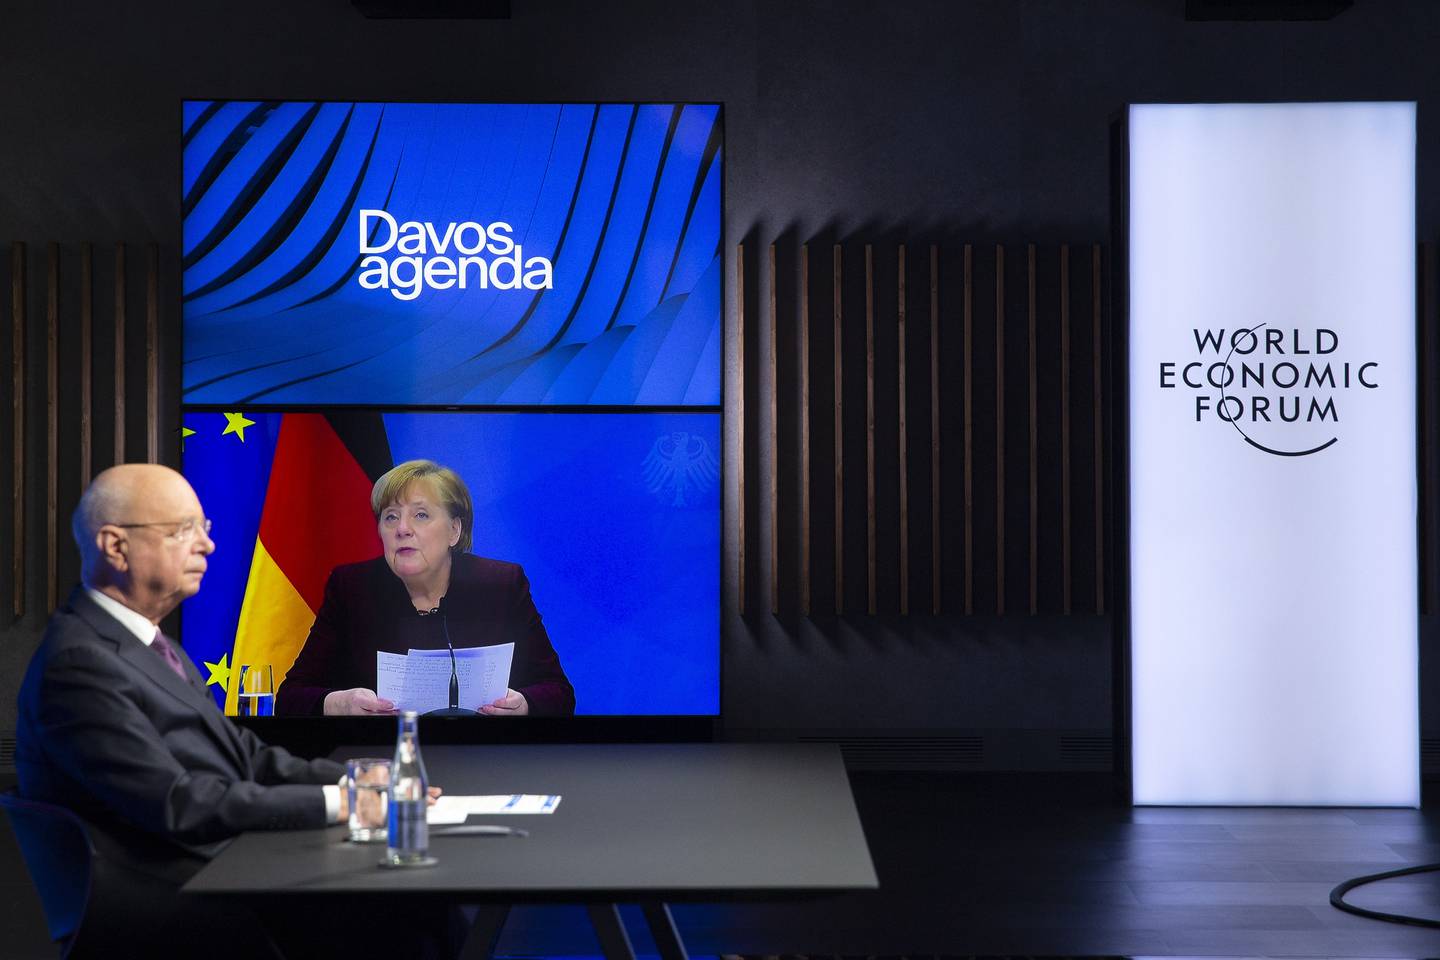 German Klaus Schwab, left, Founder and Executive Chairman of the World Economic Forum, WEF, listens to German Chancellor Angela Merkel, displayed on a video screen, during a conference at the Davos Agenda in Cologny near Geneva, Switzerland, Tuesday, Jan. 26, 2021. The Davos Agenda from Jan. 25 to Jan. 29, 2021 is an online edition due to the coronavirus disease (COVID-19) outbreak. (Salvatore Di Nolfi/Keystone via AP)